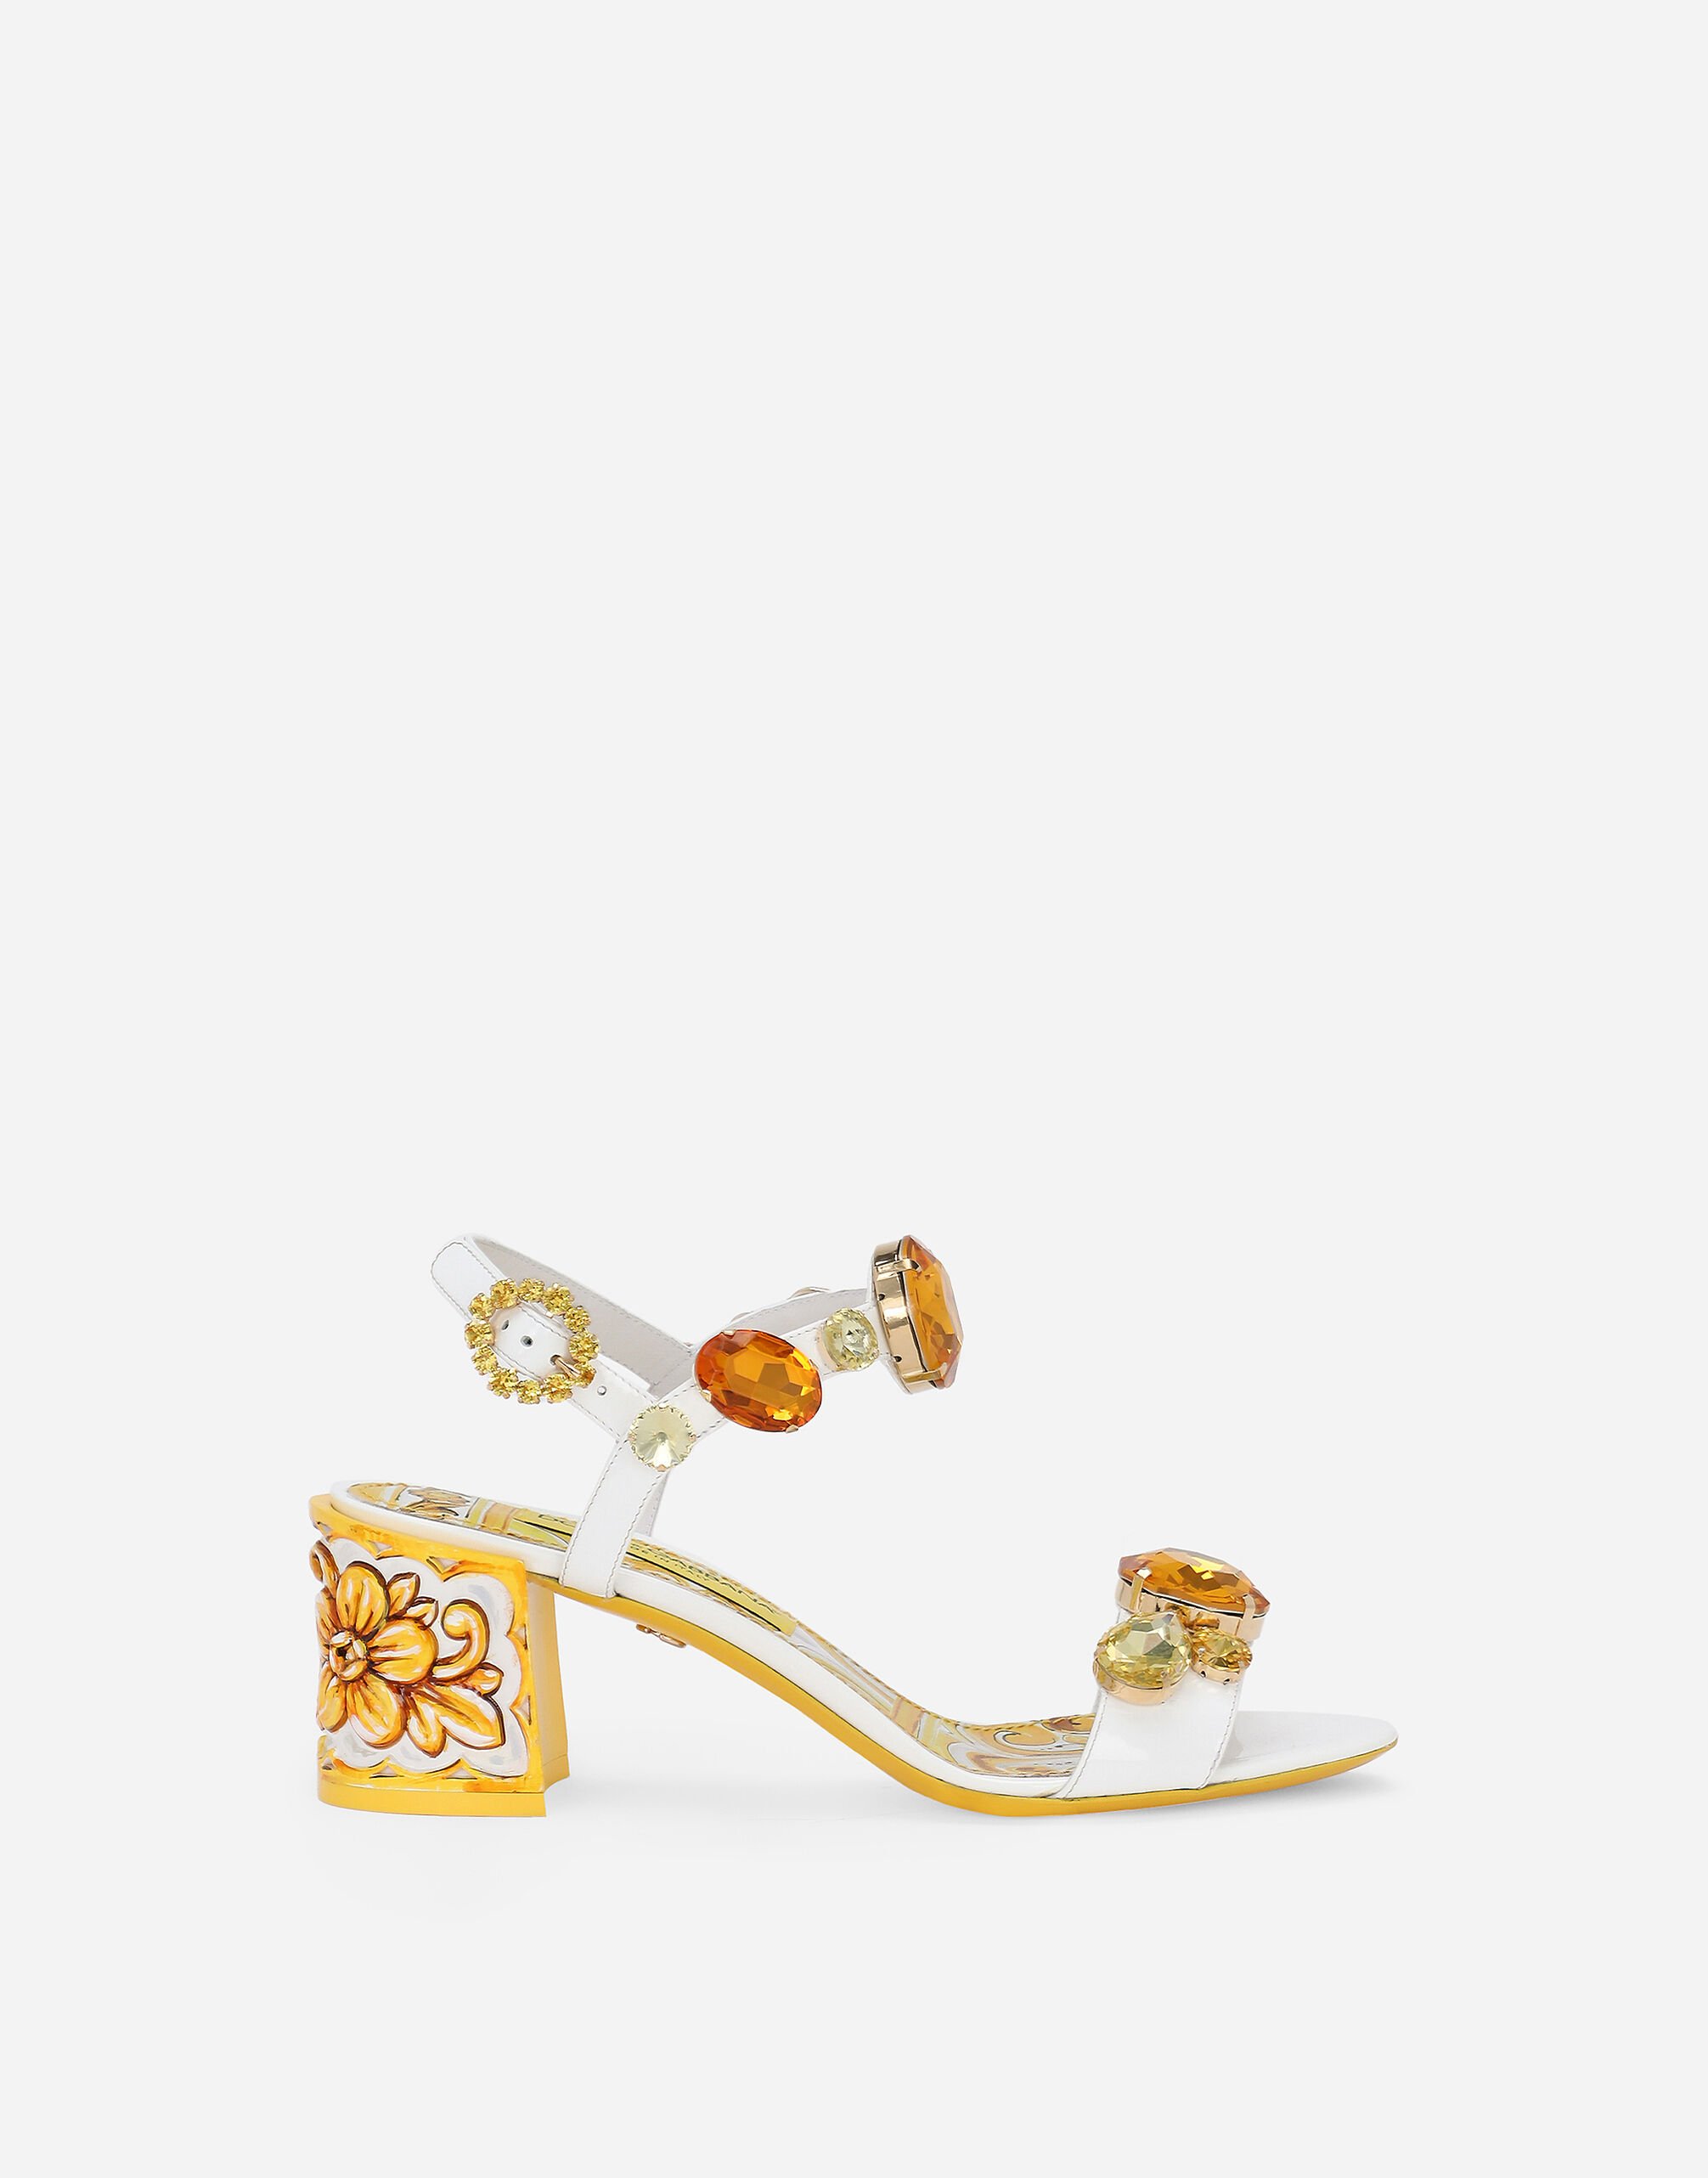 Dolce & Gabbana Patent leather sandals with stone embellishment and painted heel Print F5S65TFI5JK